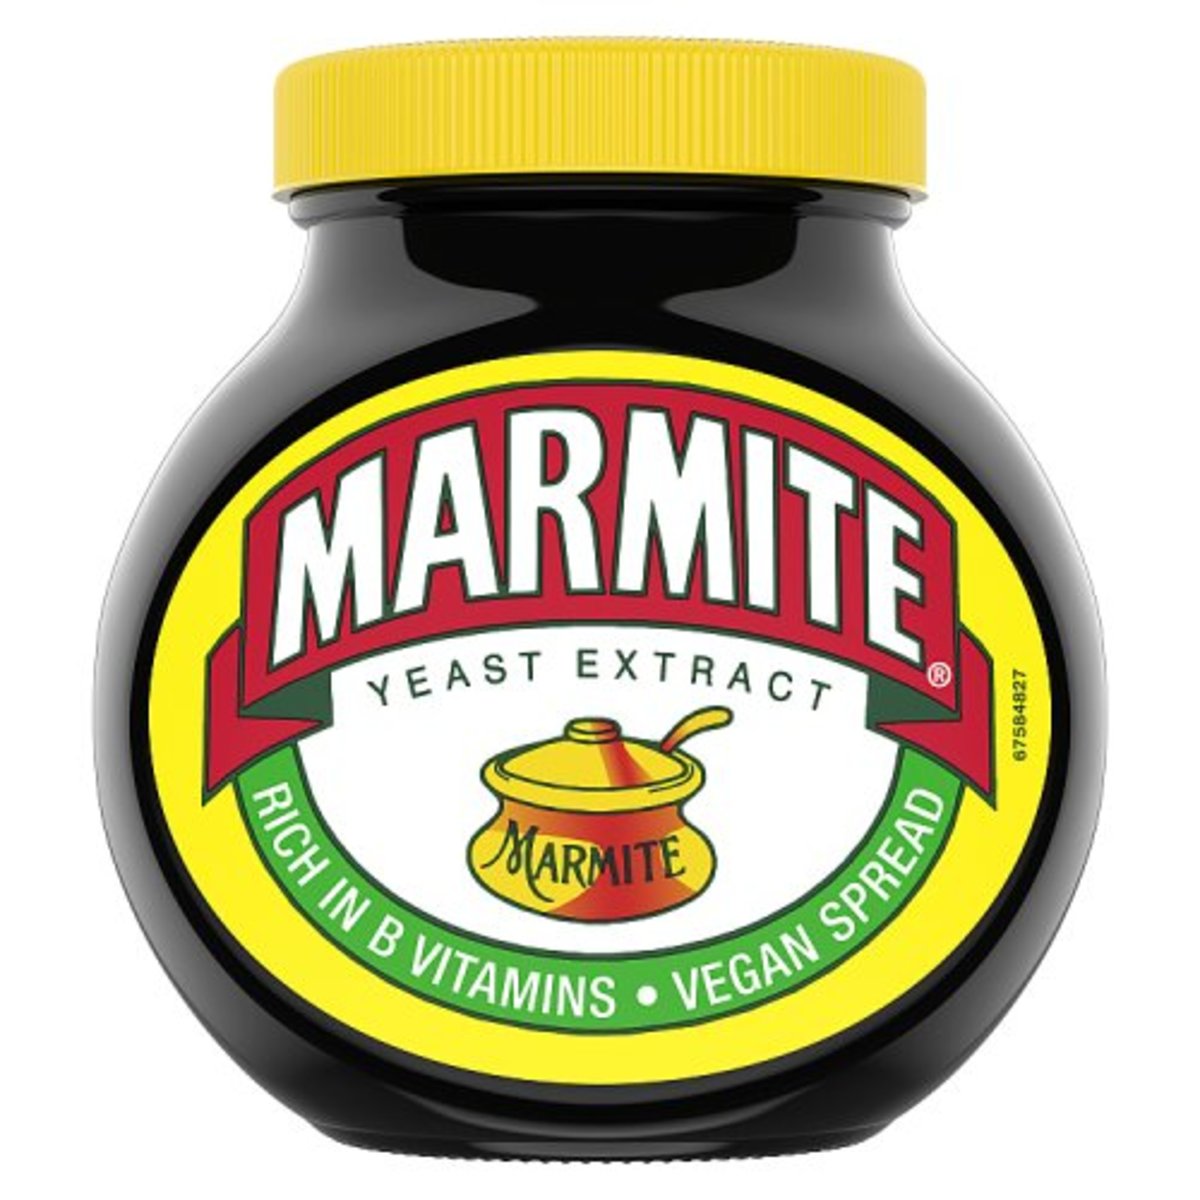 marmite-do-you-love-it-or-hate-it